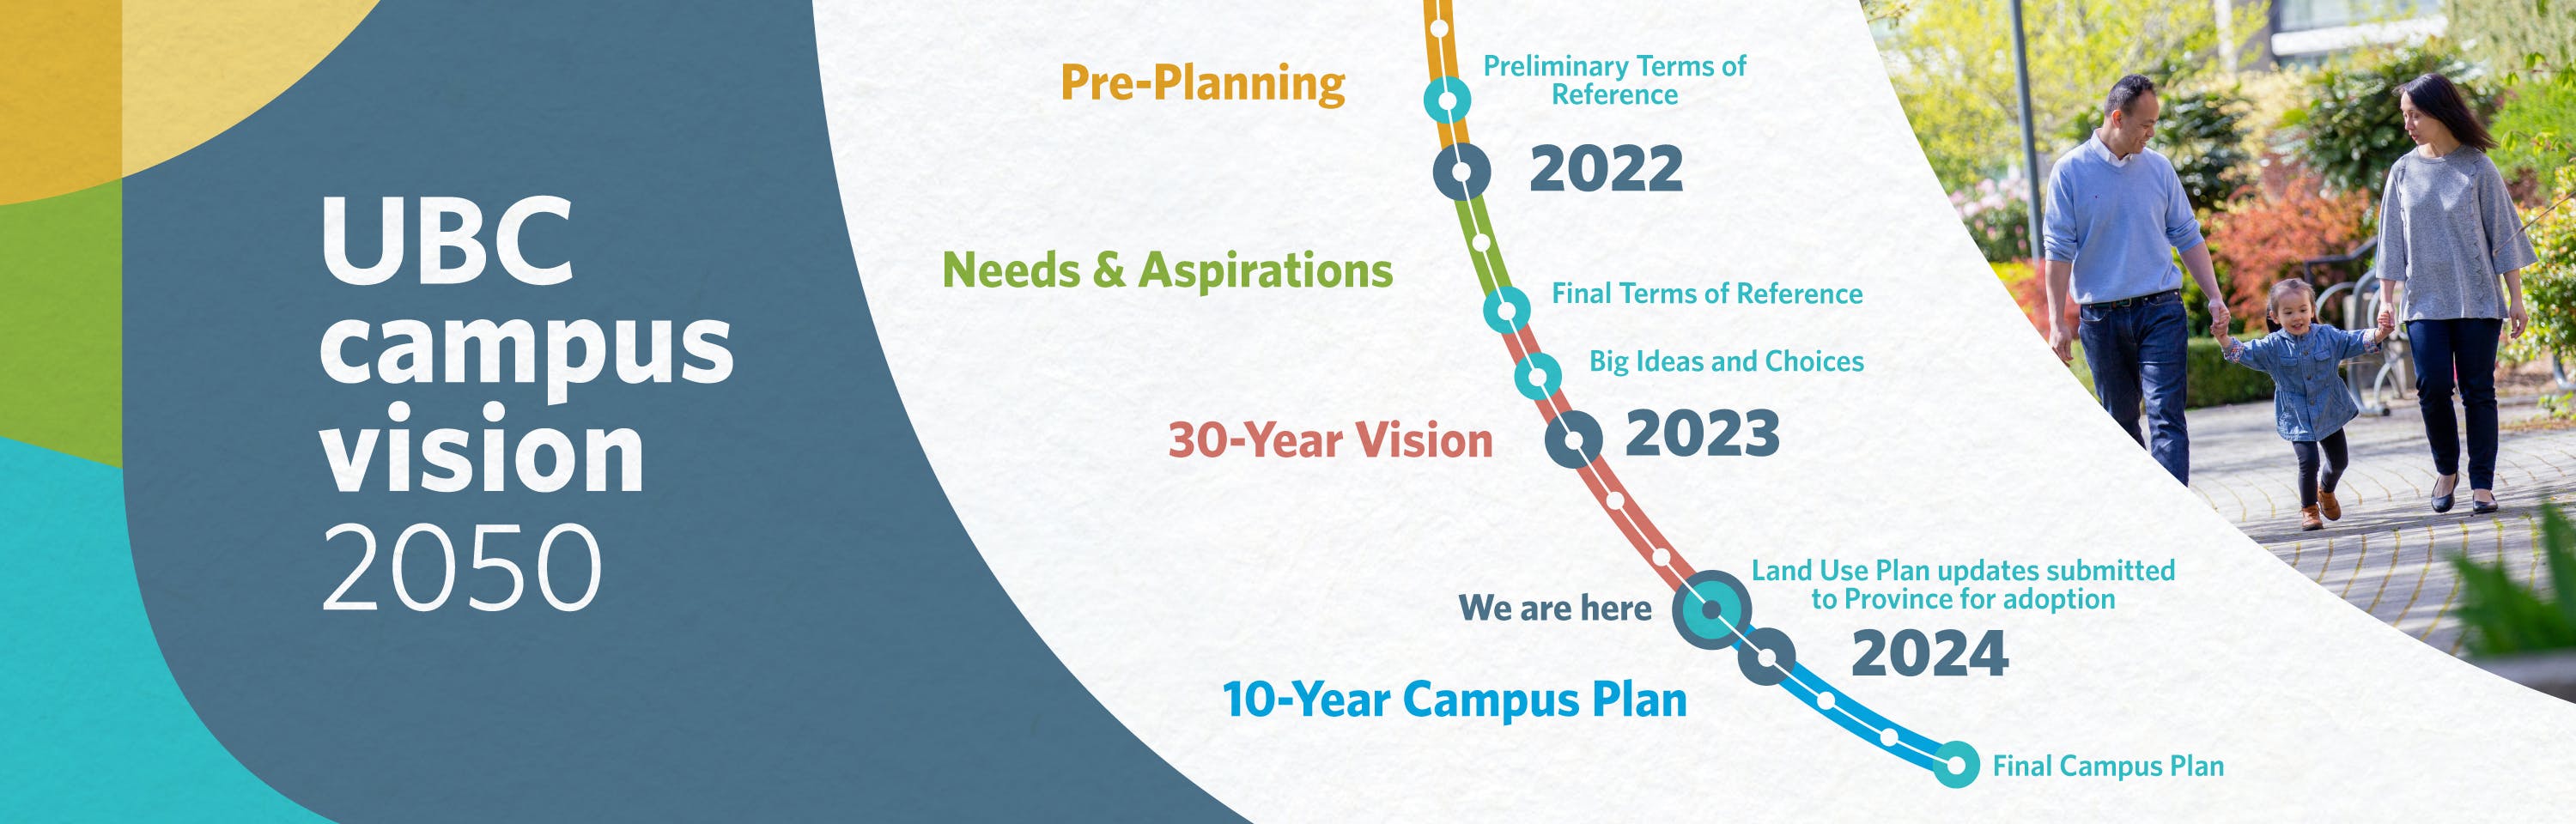 Timeline graphic that describes the Campus Vision 2050 key milestones from November 2021 to December 2024